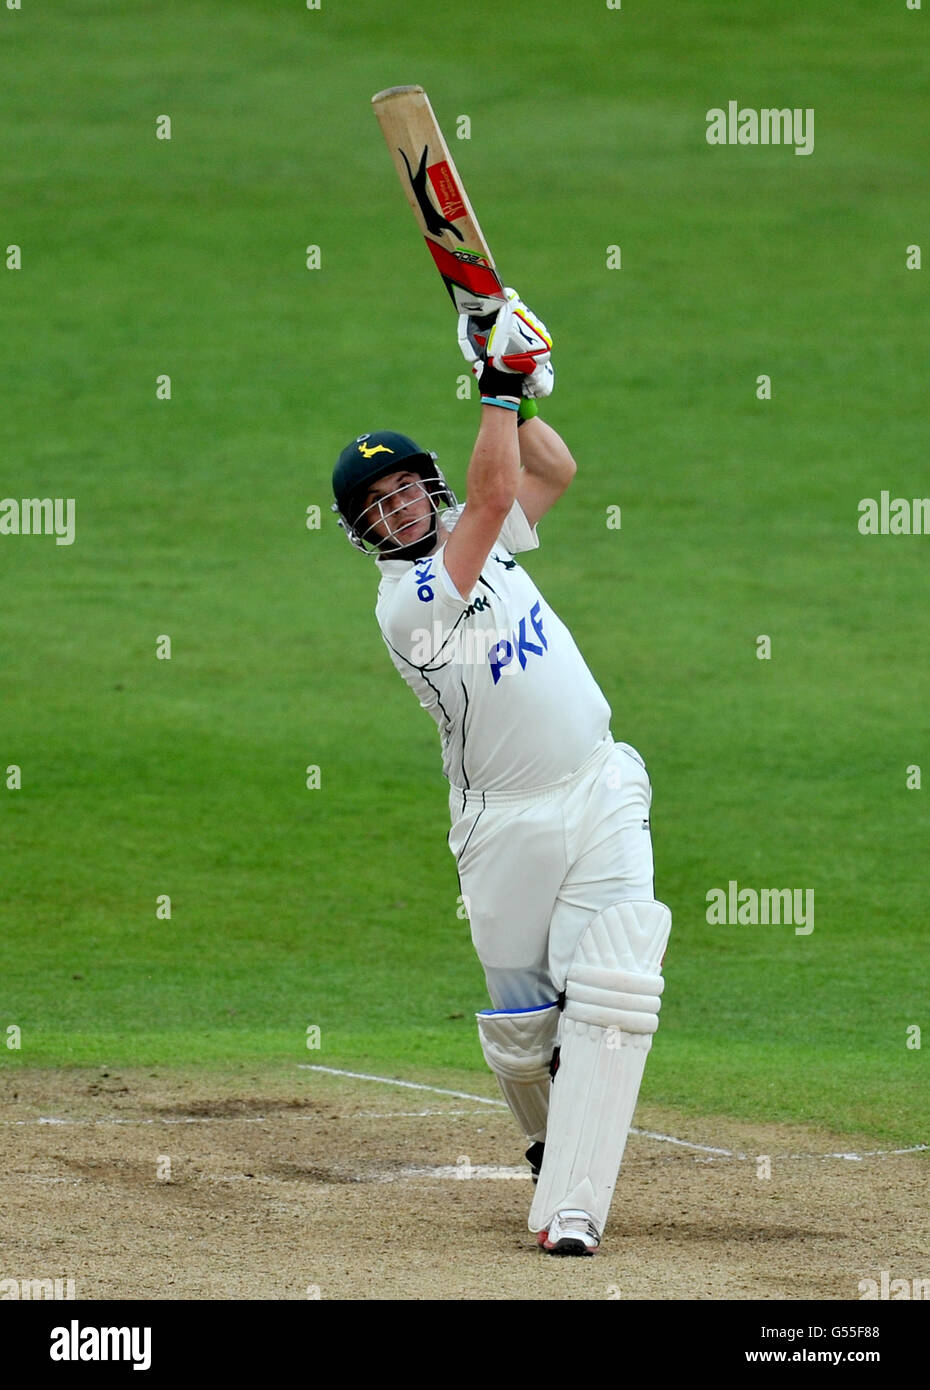 Cricket - LV= County Championship - Division One - Nottinghamshire v Middlesex - Day Two - Trent Bridge. Nottinghamshire's Steven Mullaney hits out during the LV= County Championship, Division One match at Trent Bridge, Nottingham. Stock Photo